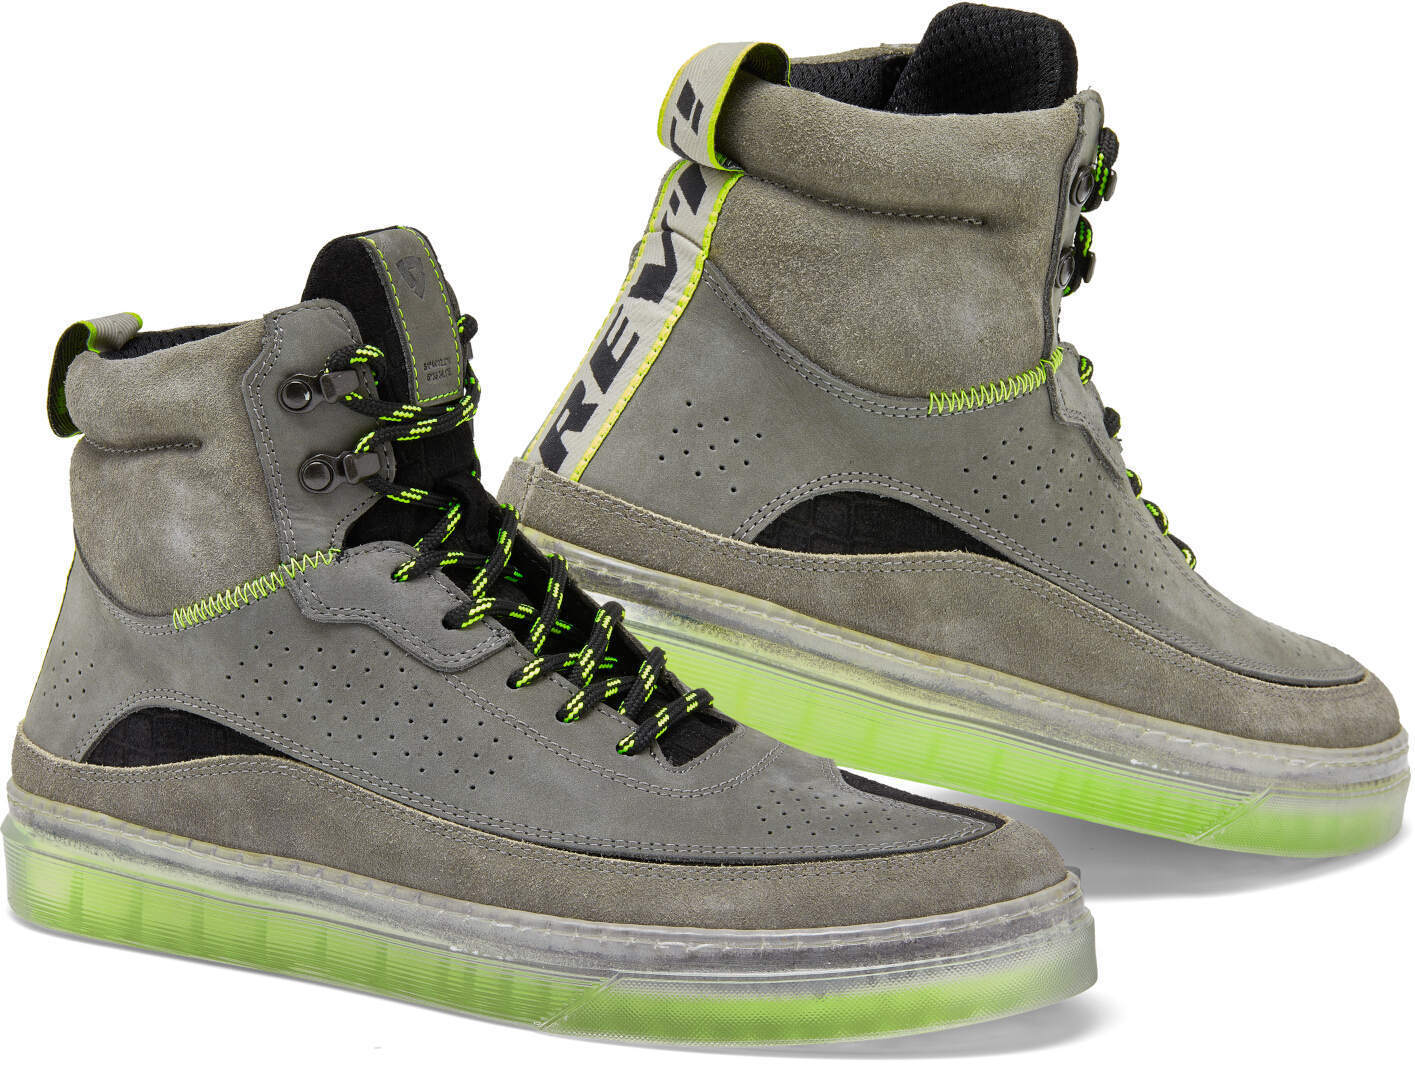 Revit Filter Motorcycle Shoes  - Grey Yellow